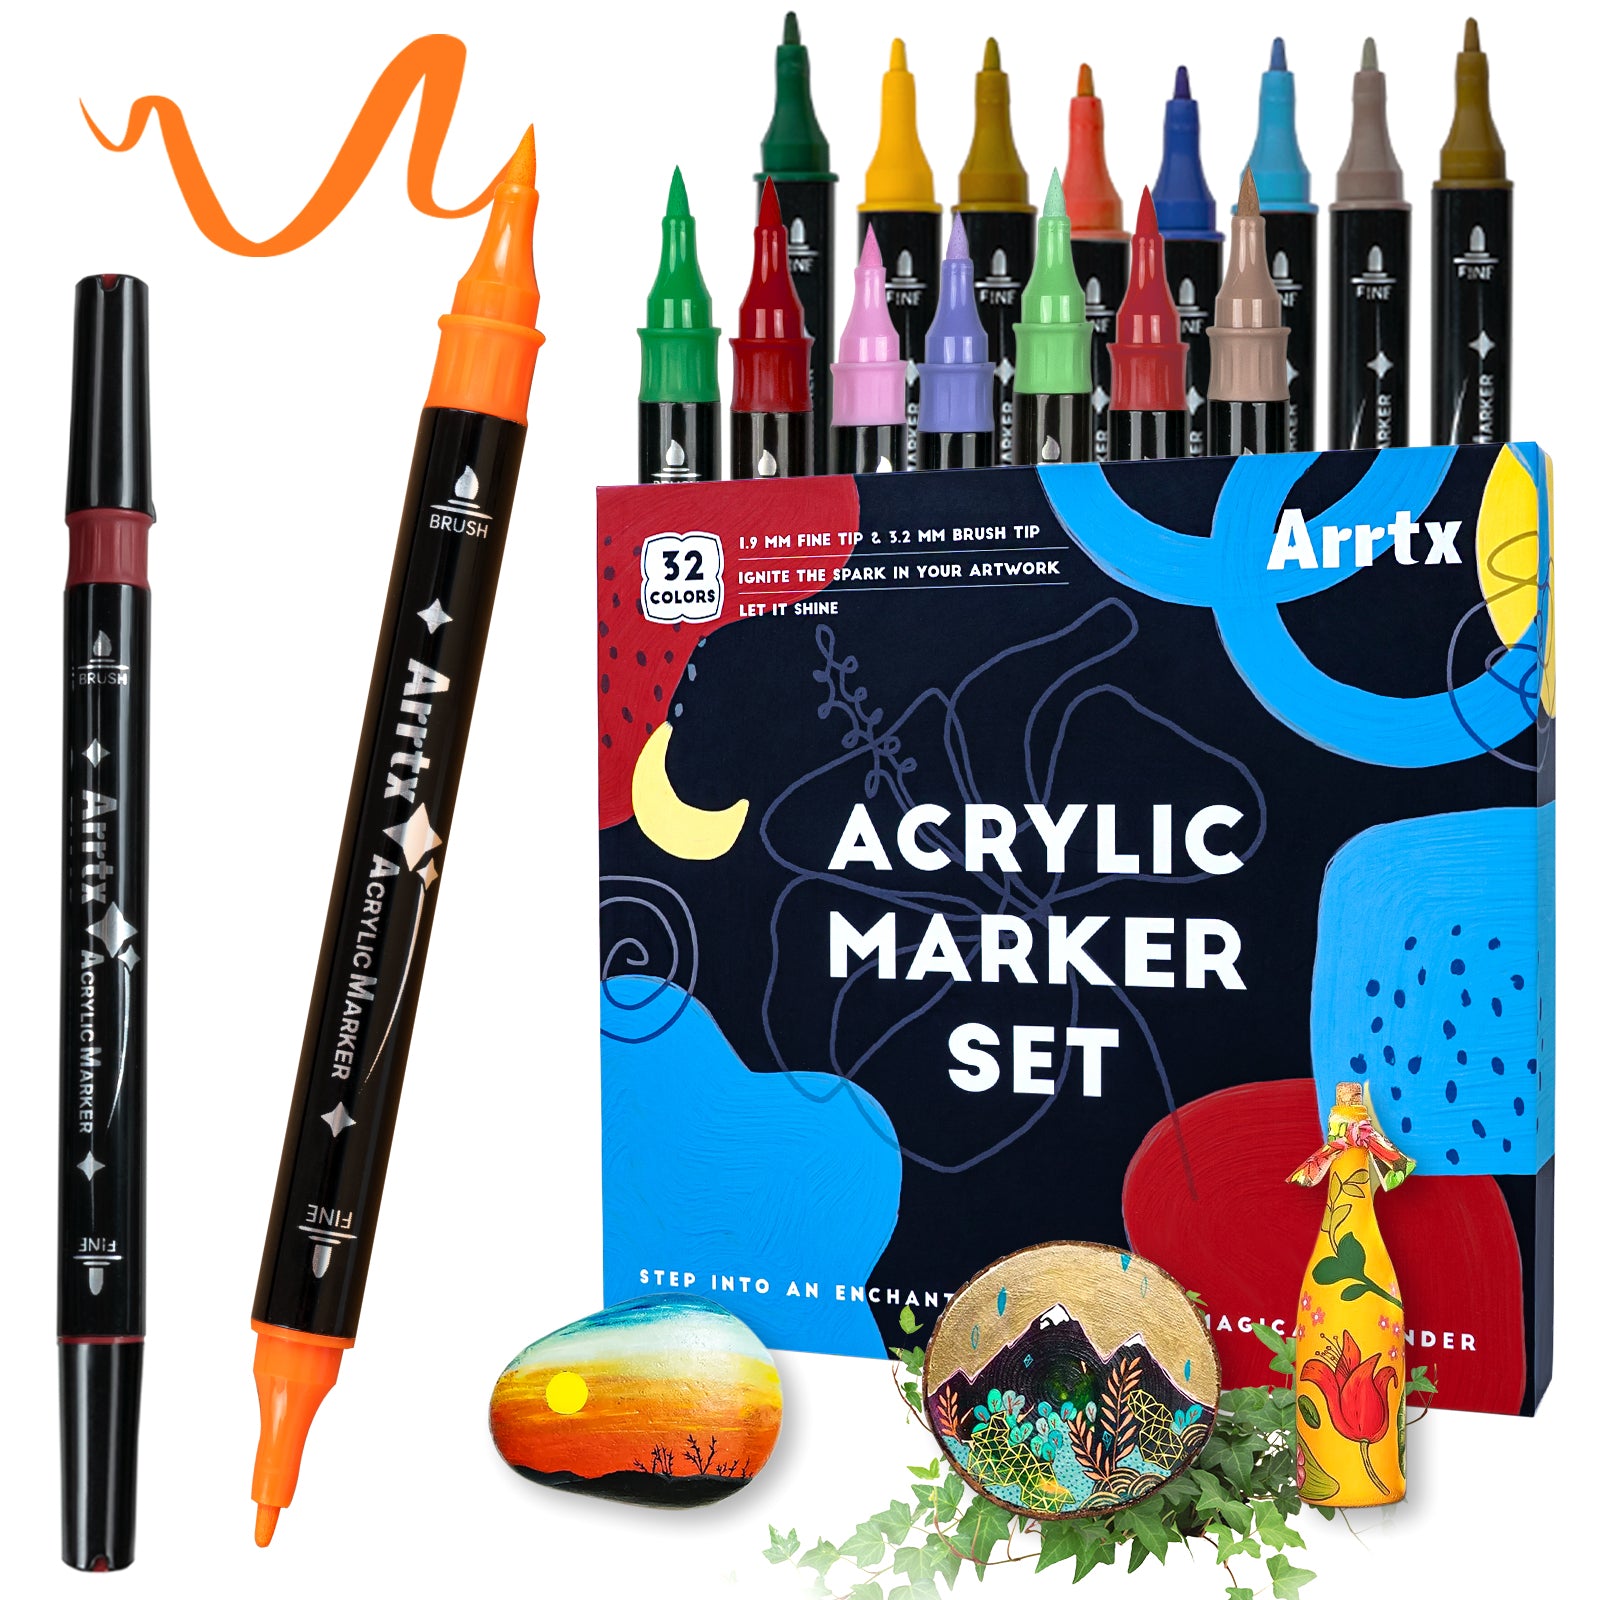 Arrtx Colored Pencils 72 Colors + Acrylic Paint Markers Set of 32 Colors  for Drawing Sketching Shading and Coloring Books